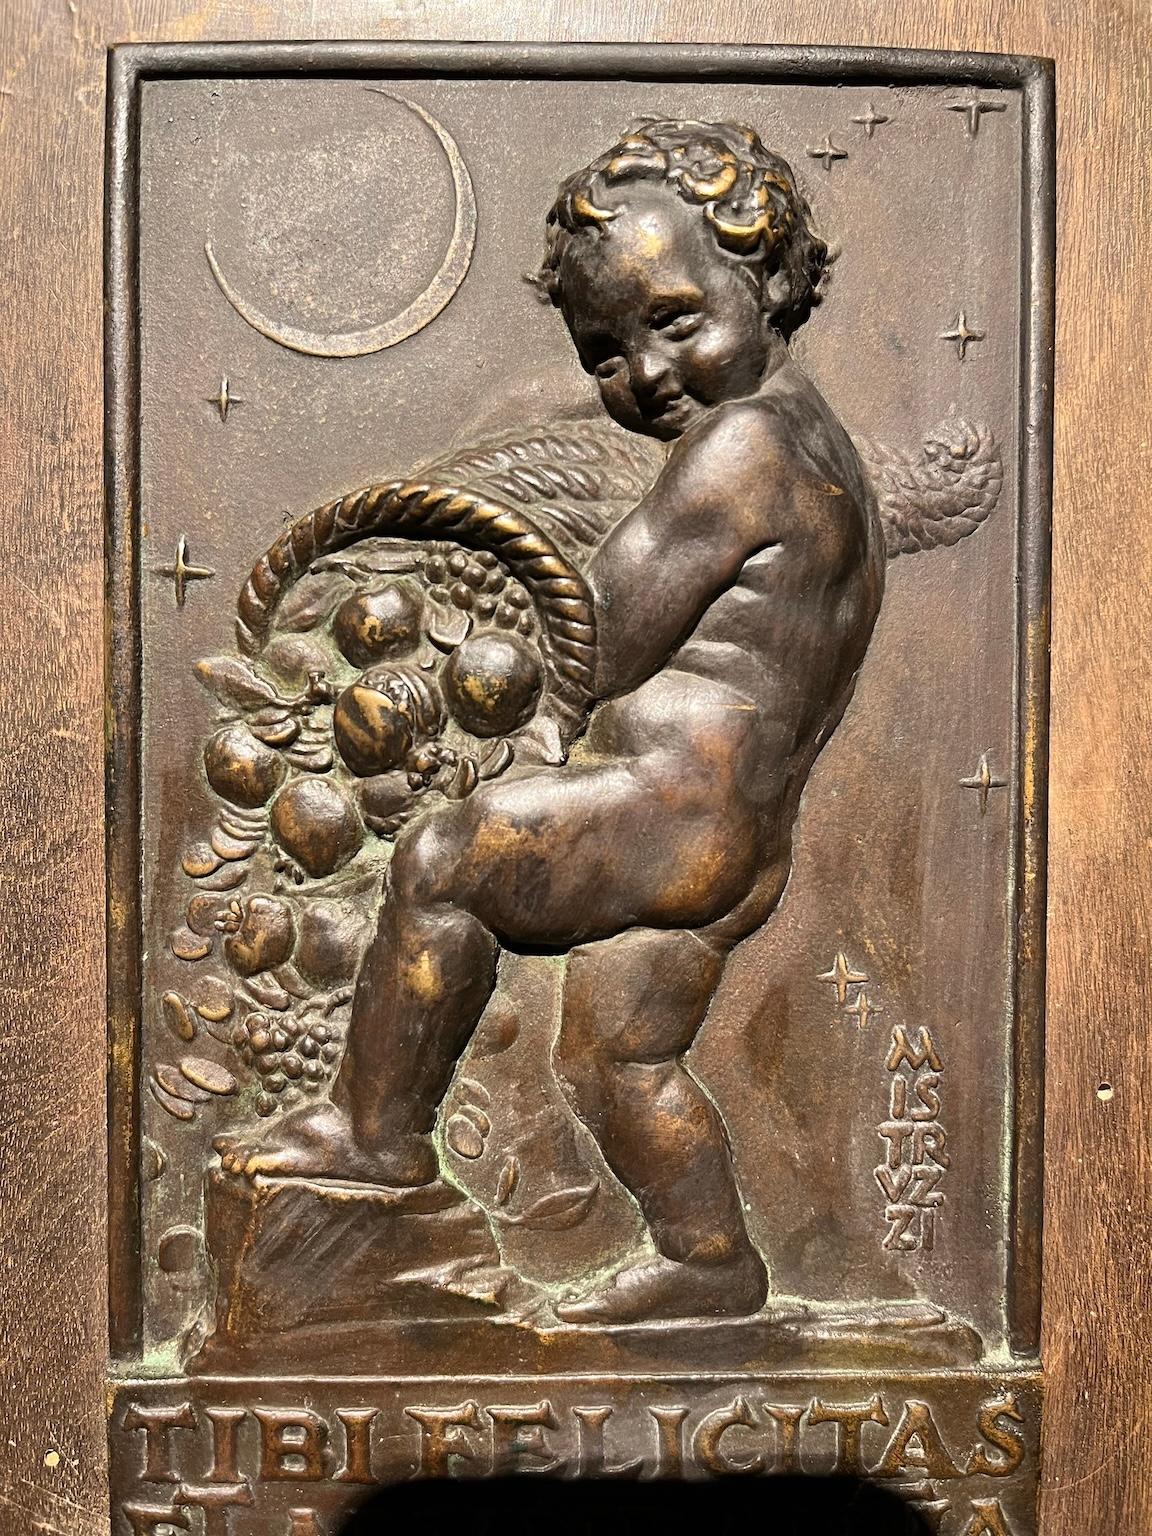 Bronze plaque (measurements without the wood are 12 x 20 cm) with bas-relief representing a putto with a cornucopia and the crescent moon. At the bottom runs in capital letters a Latin inscription 